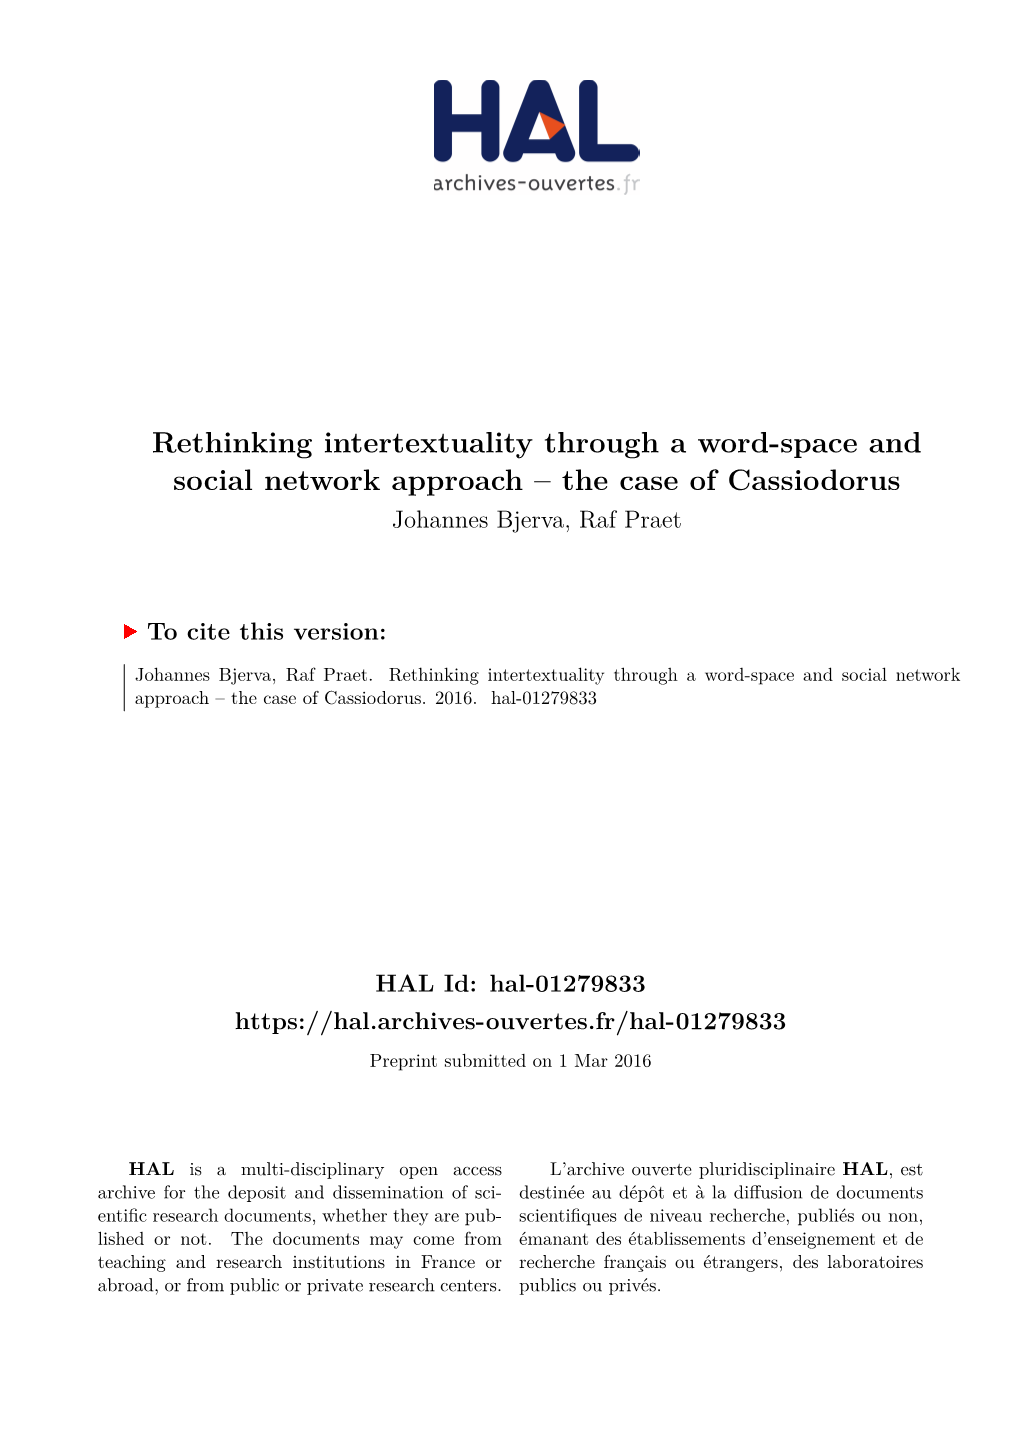 Rethinking Intertextuality Through a Word-Space and Social Network Approach – the Case of Cassiodorus Johannes Bjerva, Raf Praet